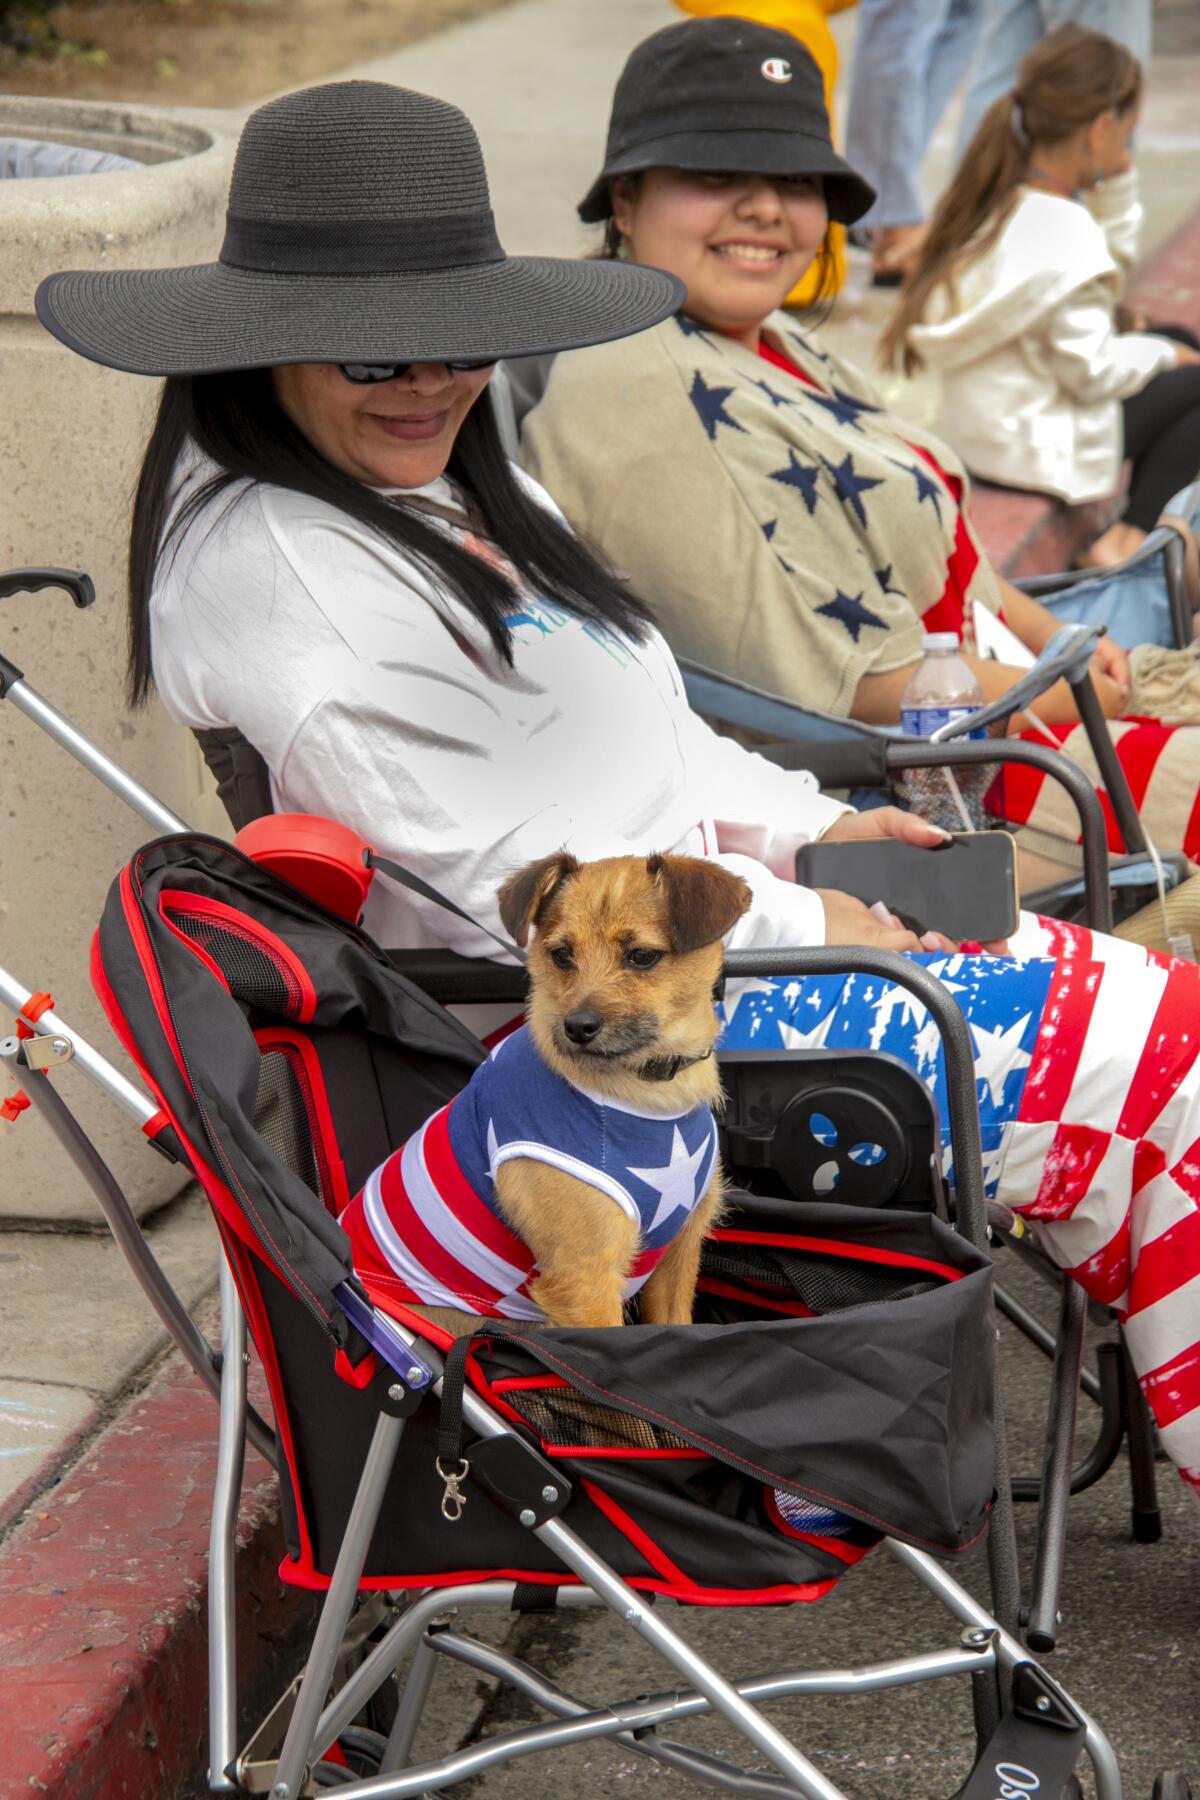 Draco the patriotic dog, pictured with Jayoli Sebellon and Thania Delgado, waits on Pacific Coast Highway for the parade.